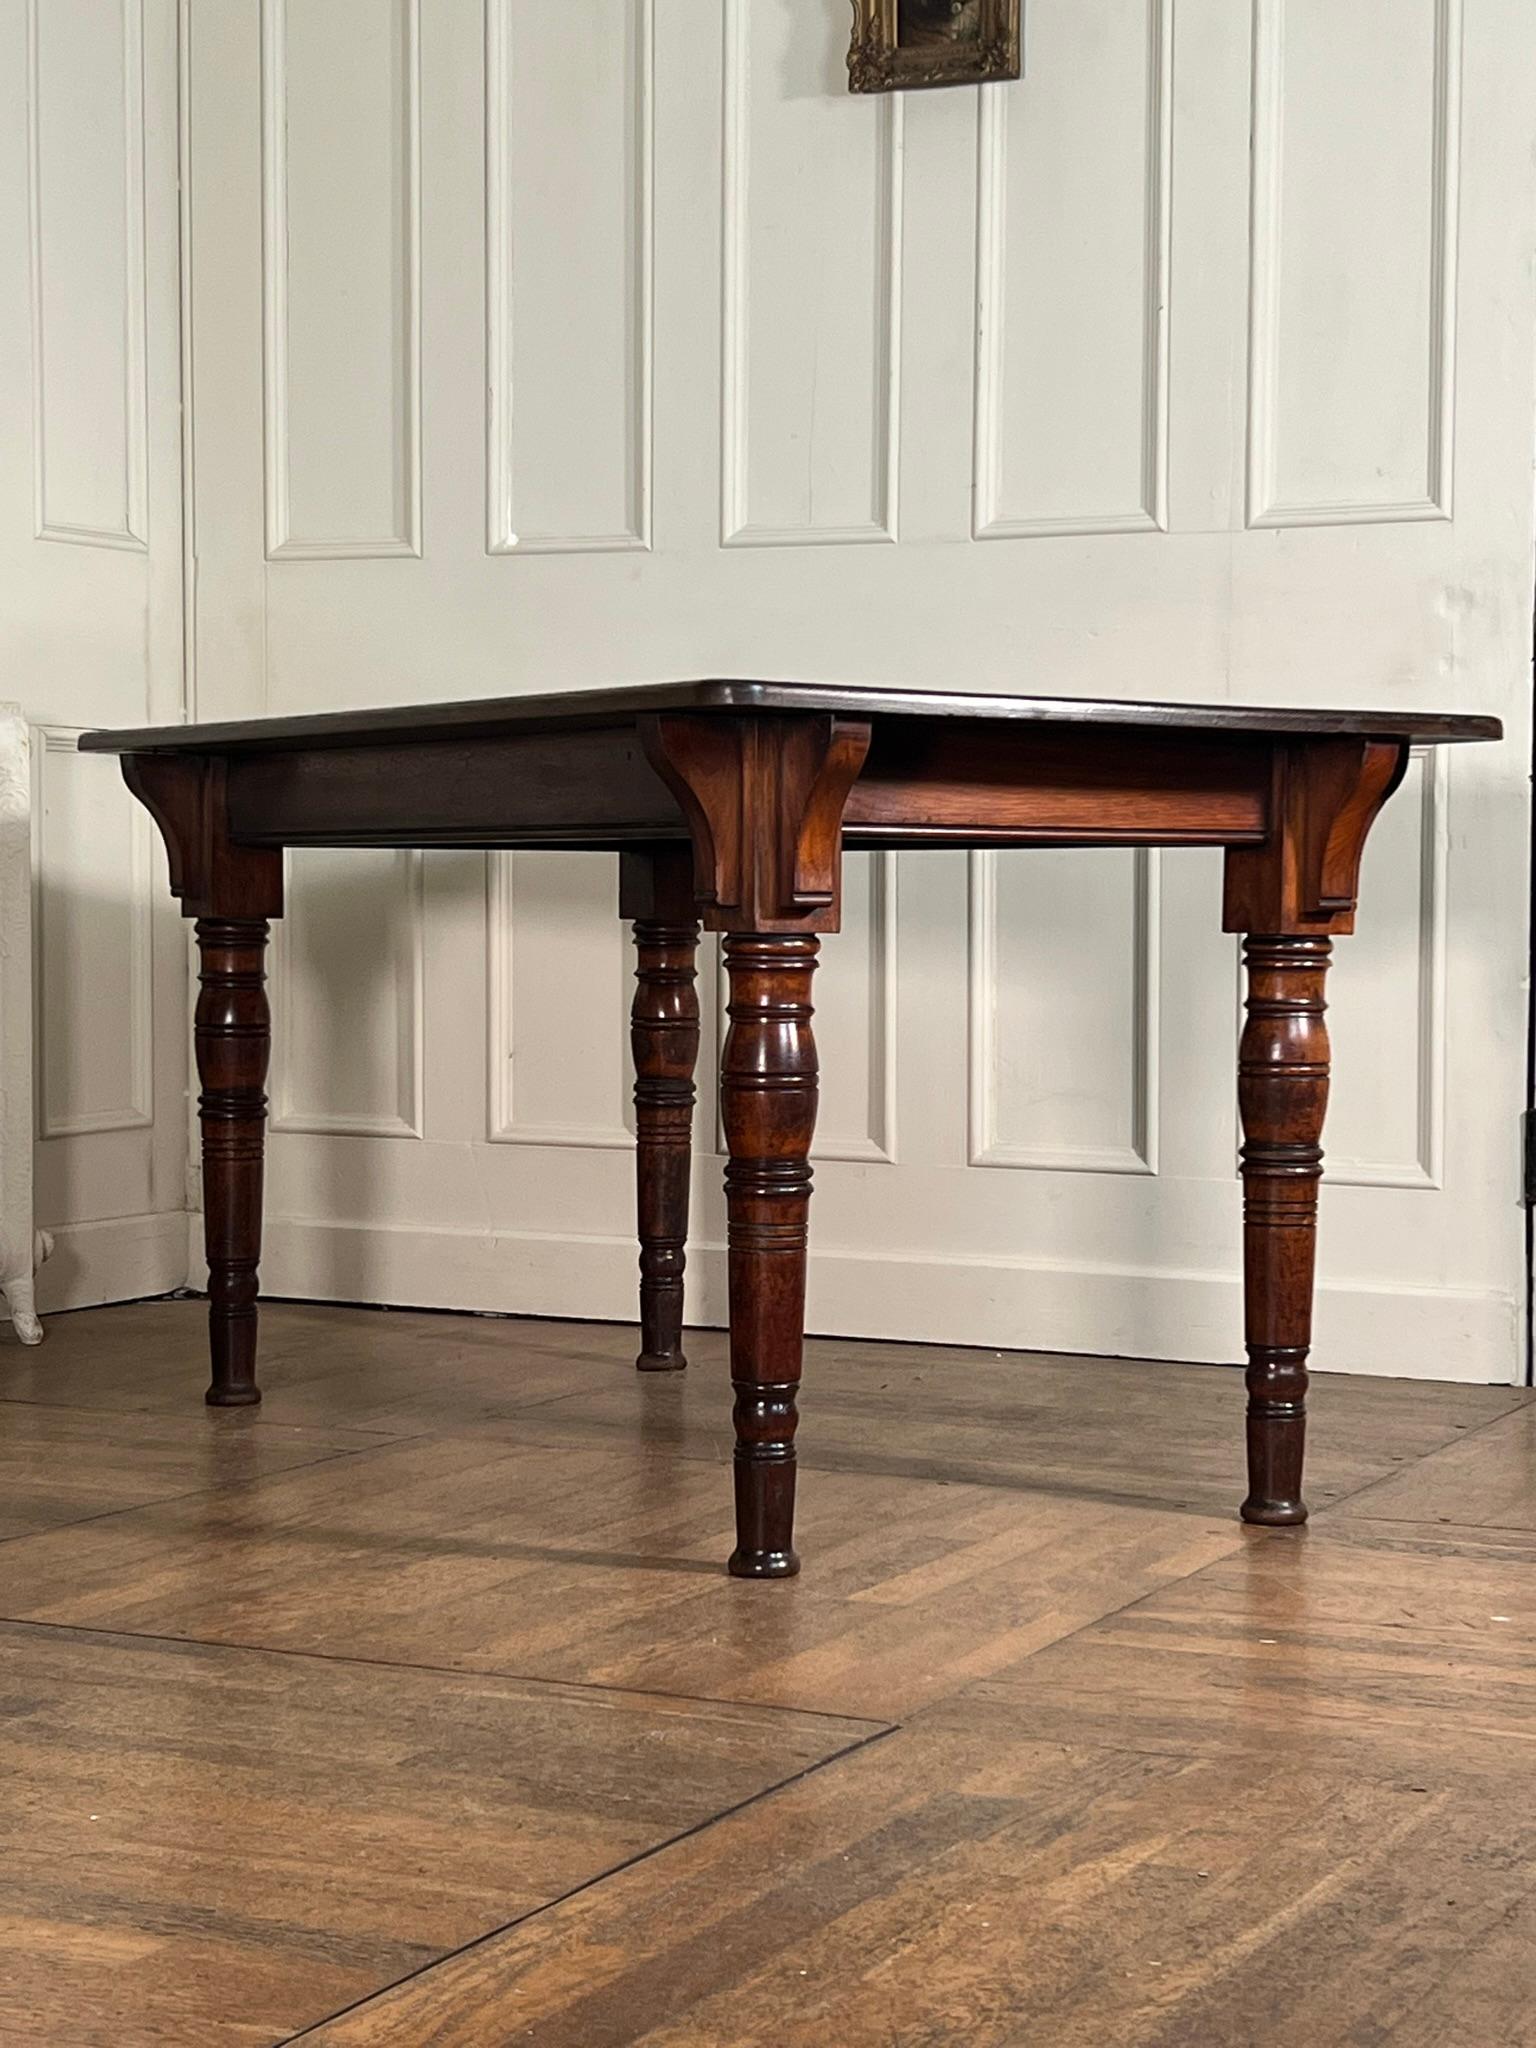 19th century Gillows of Lancaster table.

Mahogany table base stamped with the makers mark and model number L4953 with a later oak plank top.

This would have originally been a section of a larger country house dining table.

Well-turned legs and